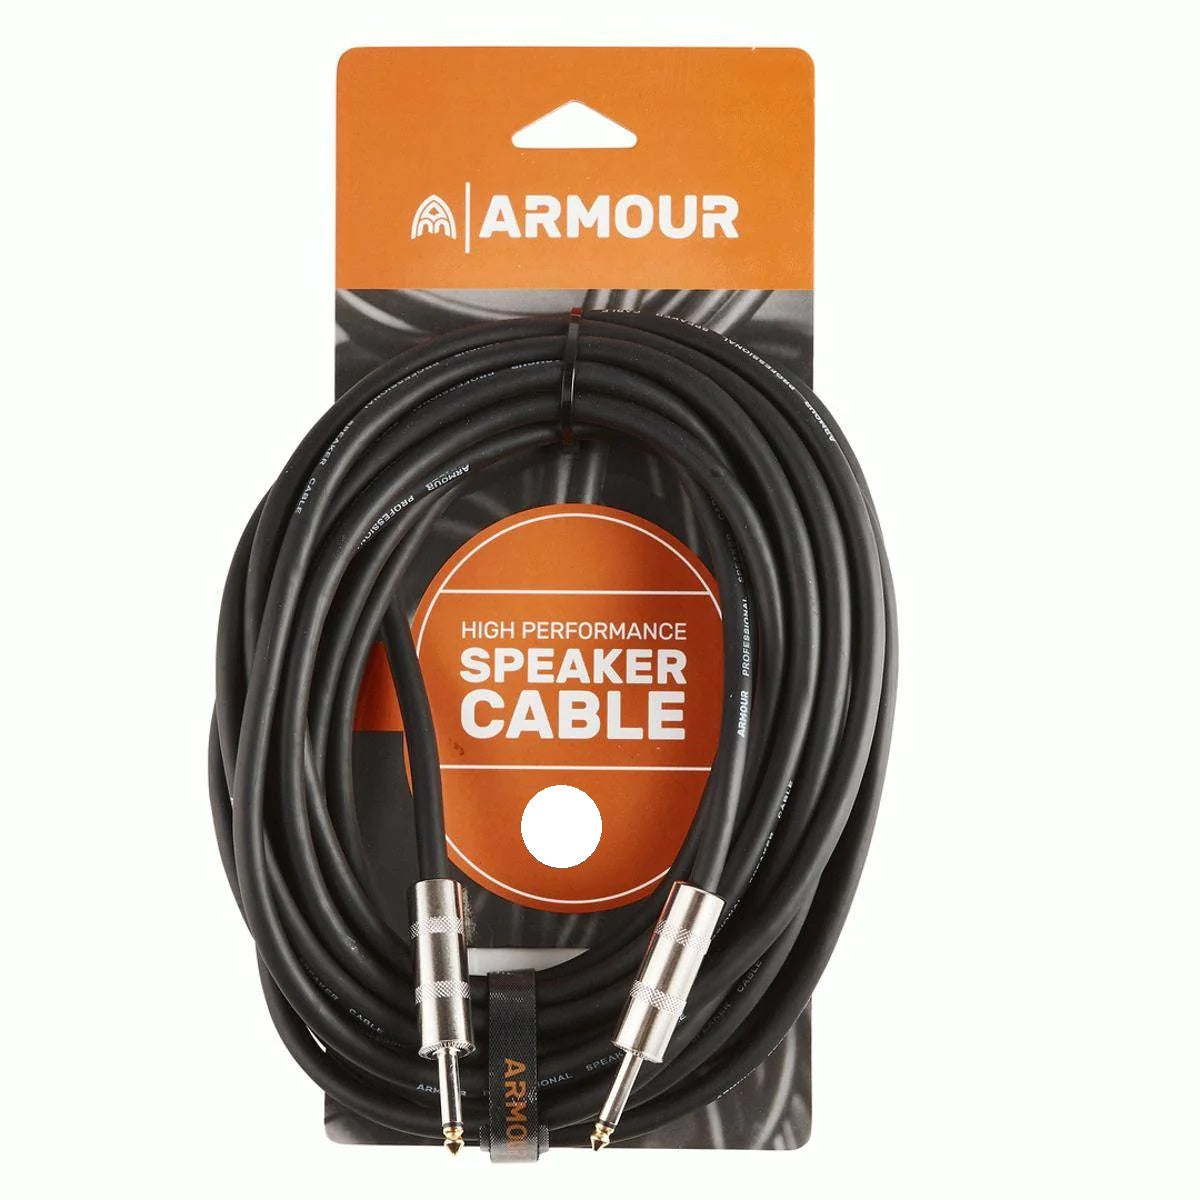 Armour SJP50 Speaker Cable 50ft Jack to jack